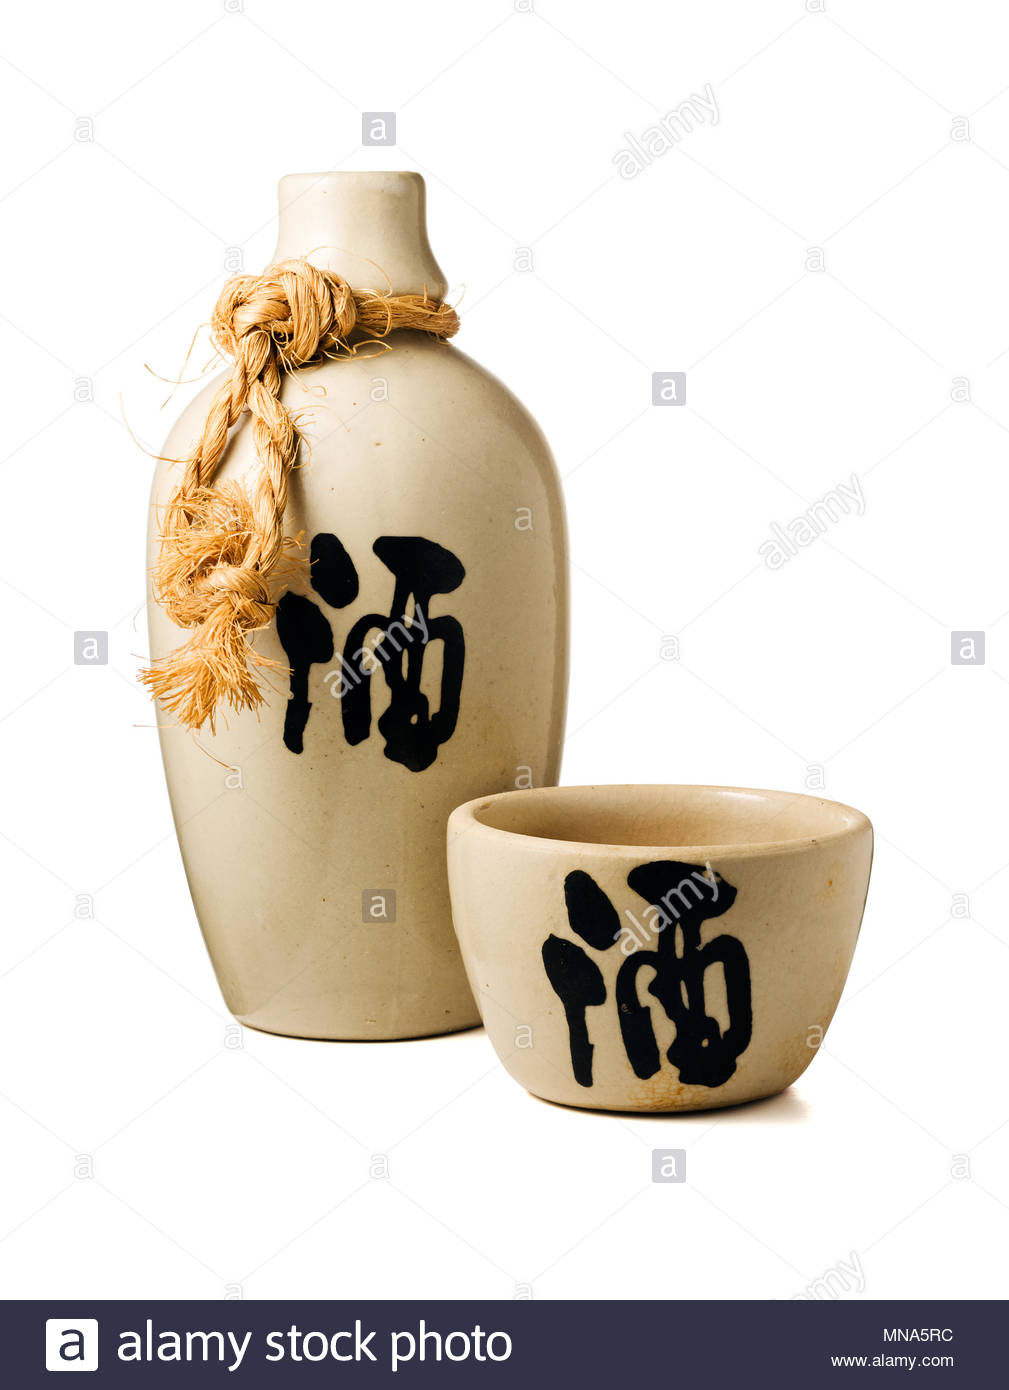 Sake Bottle And Cup With The Ideogram For Liquor On Both